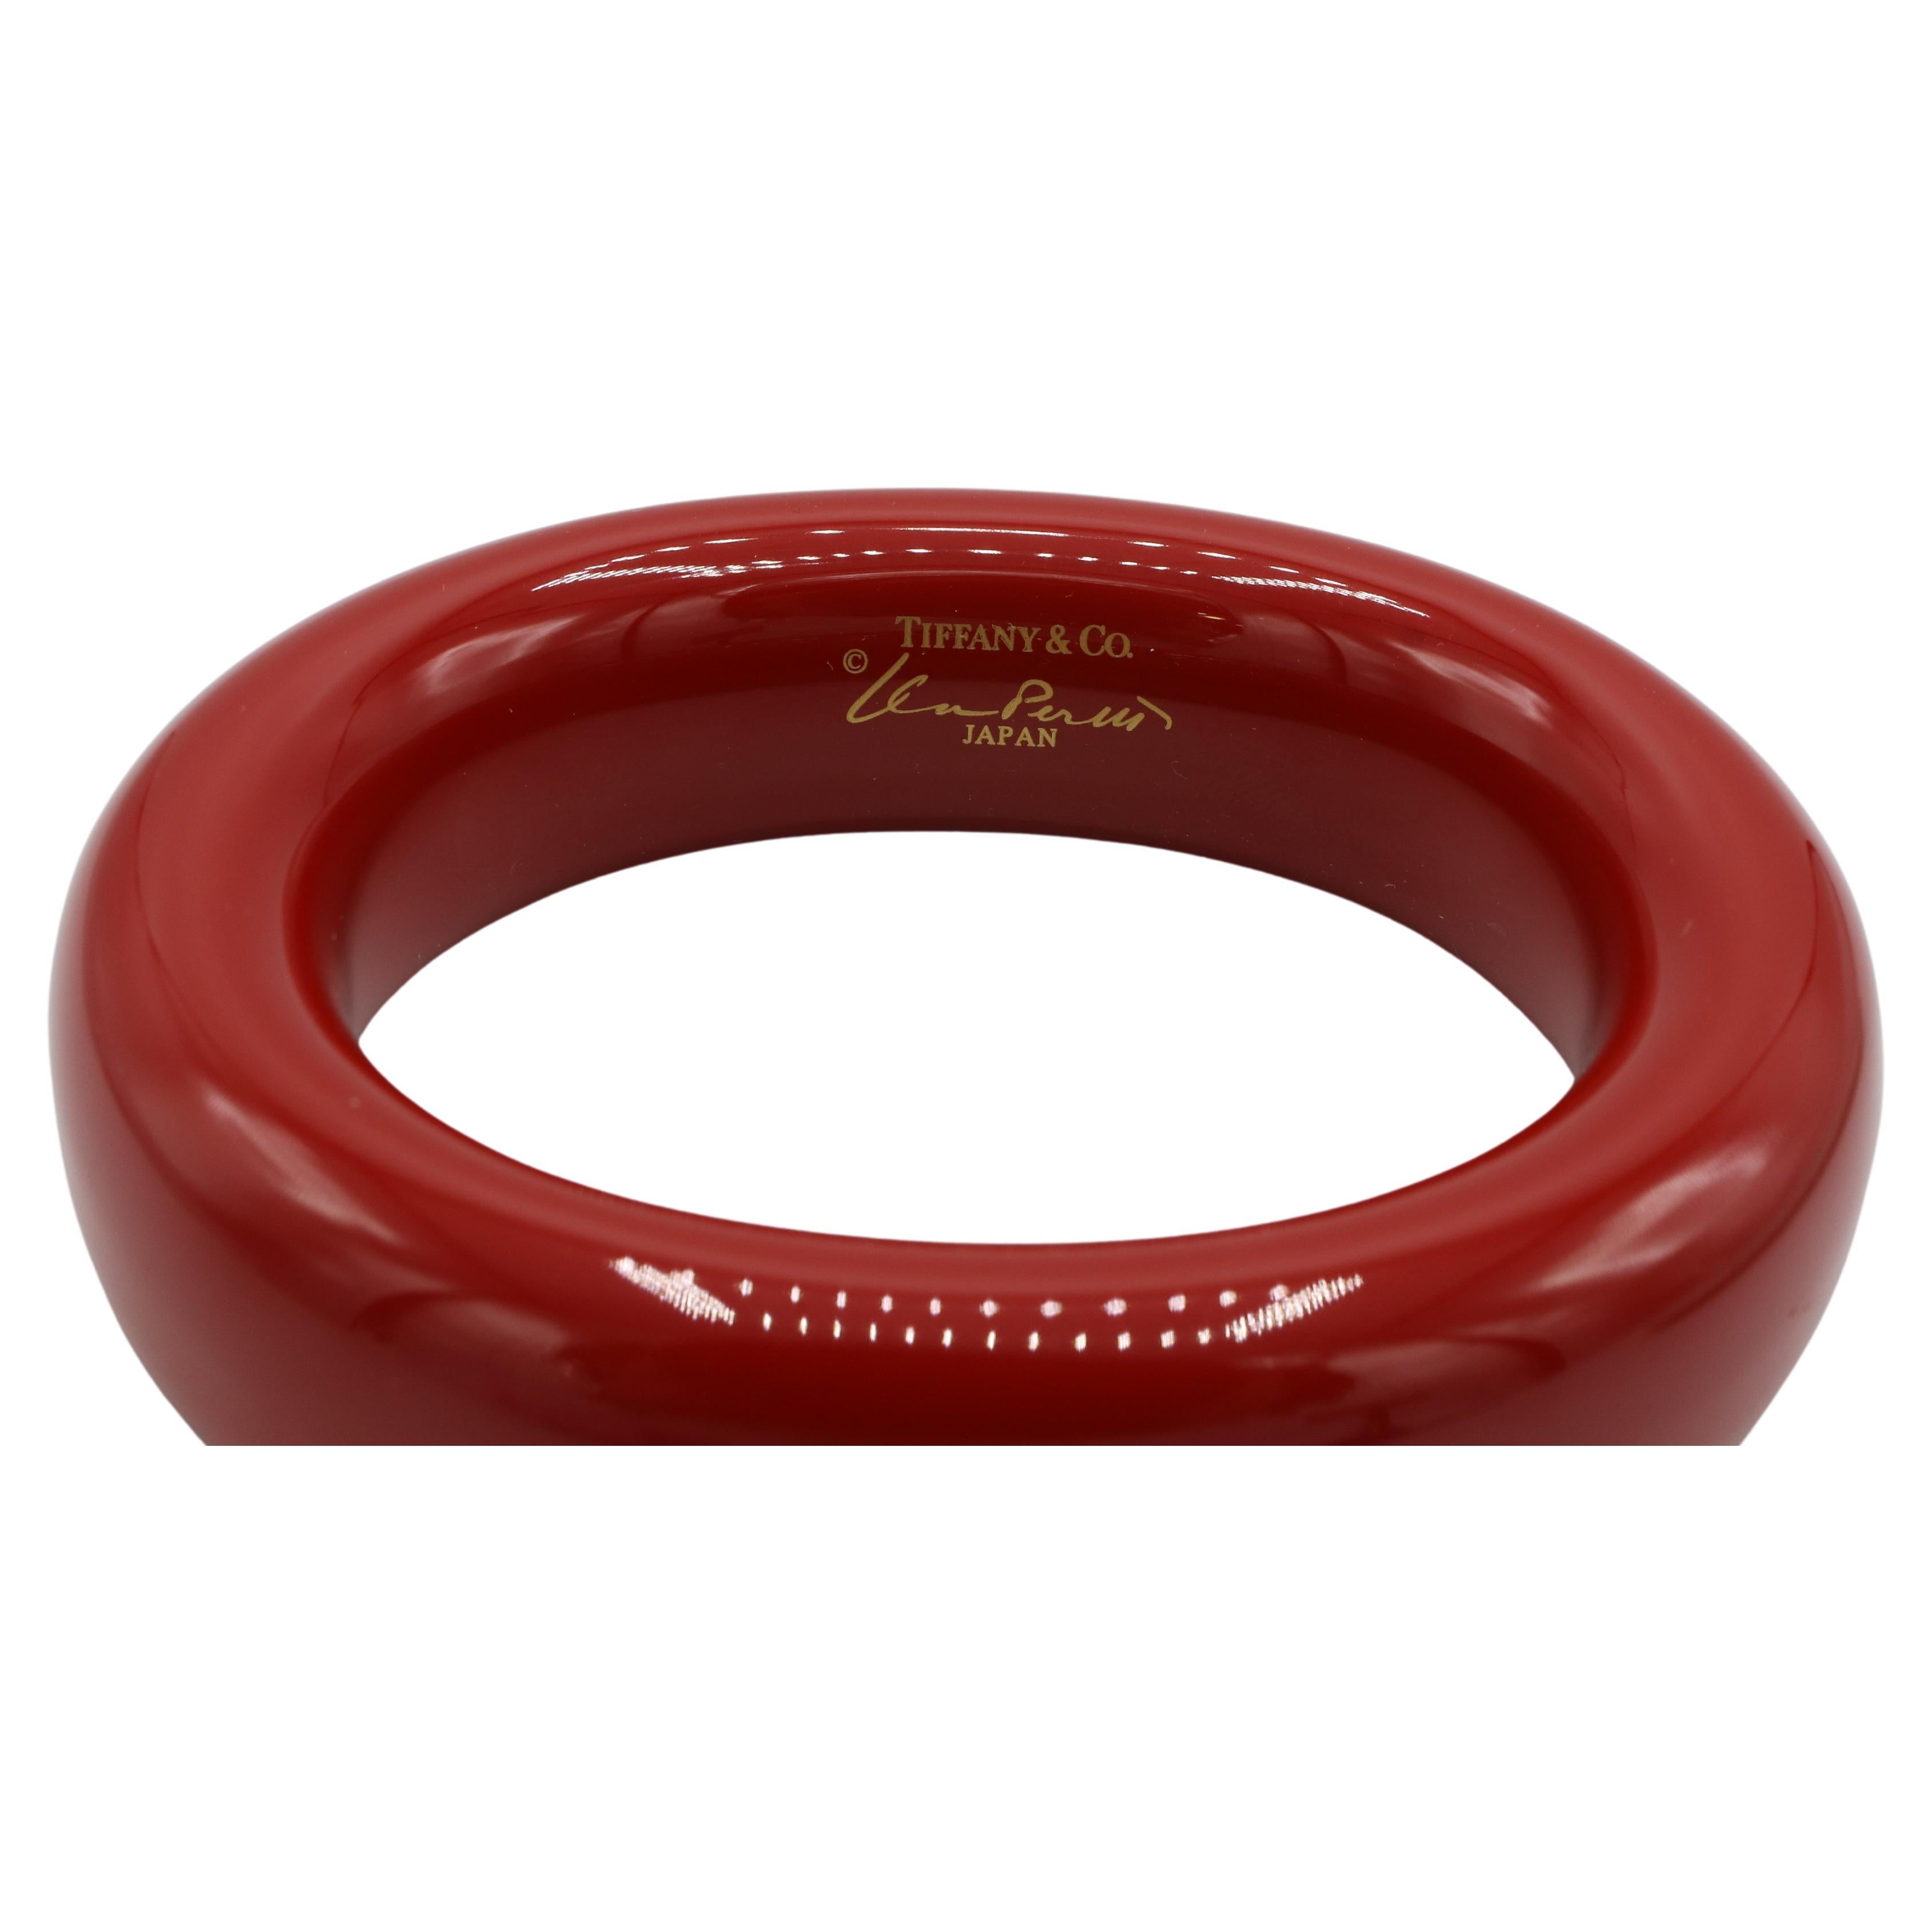 Tiffany & Co. Elsa Peretti Red Lacquer Bangle Bracelet In Excellent Condition For Sale In  Baltimore, MD